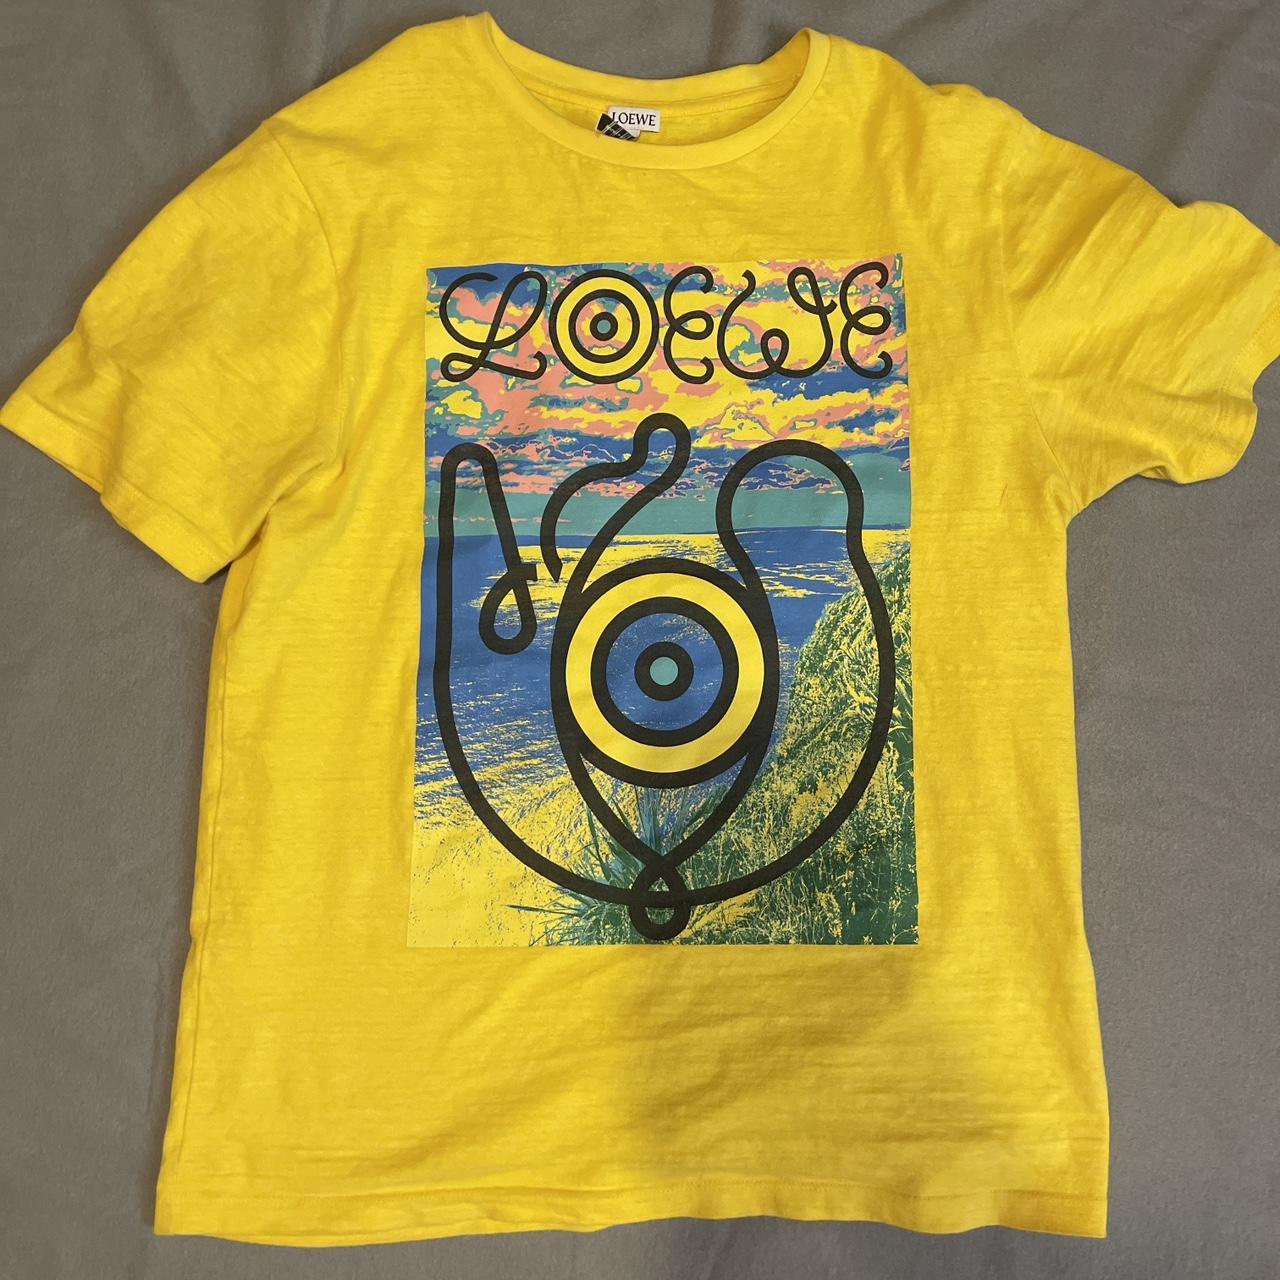 Product Image 1 - Loewe t shirt only worn